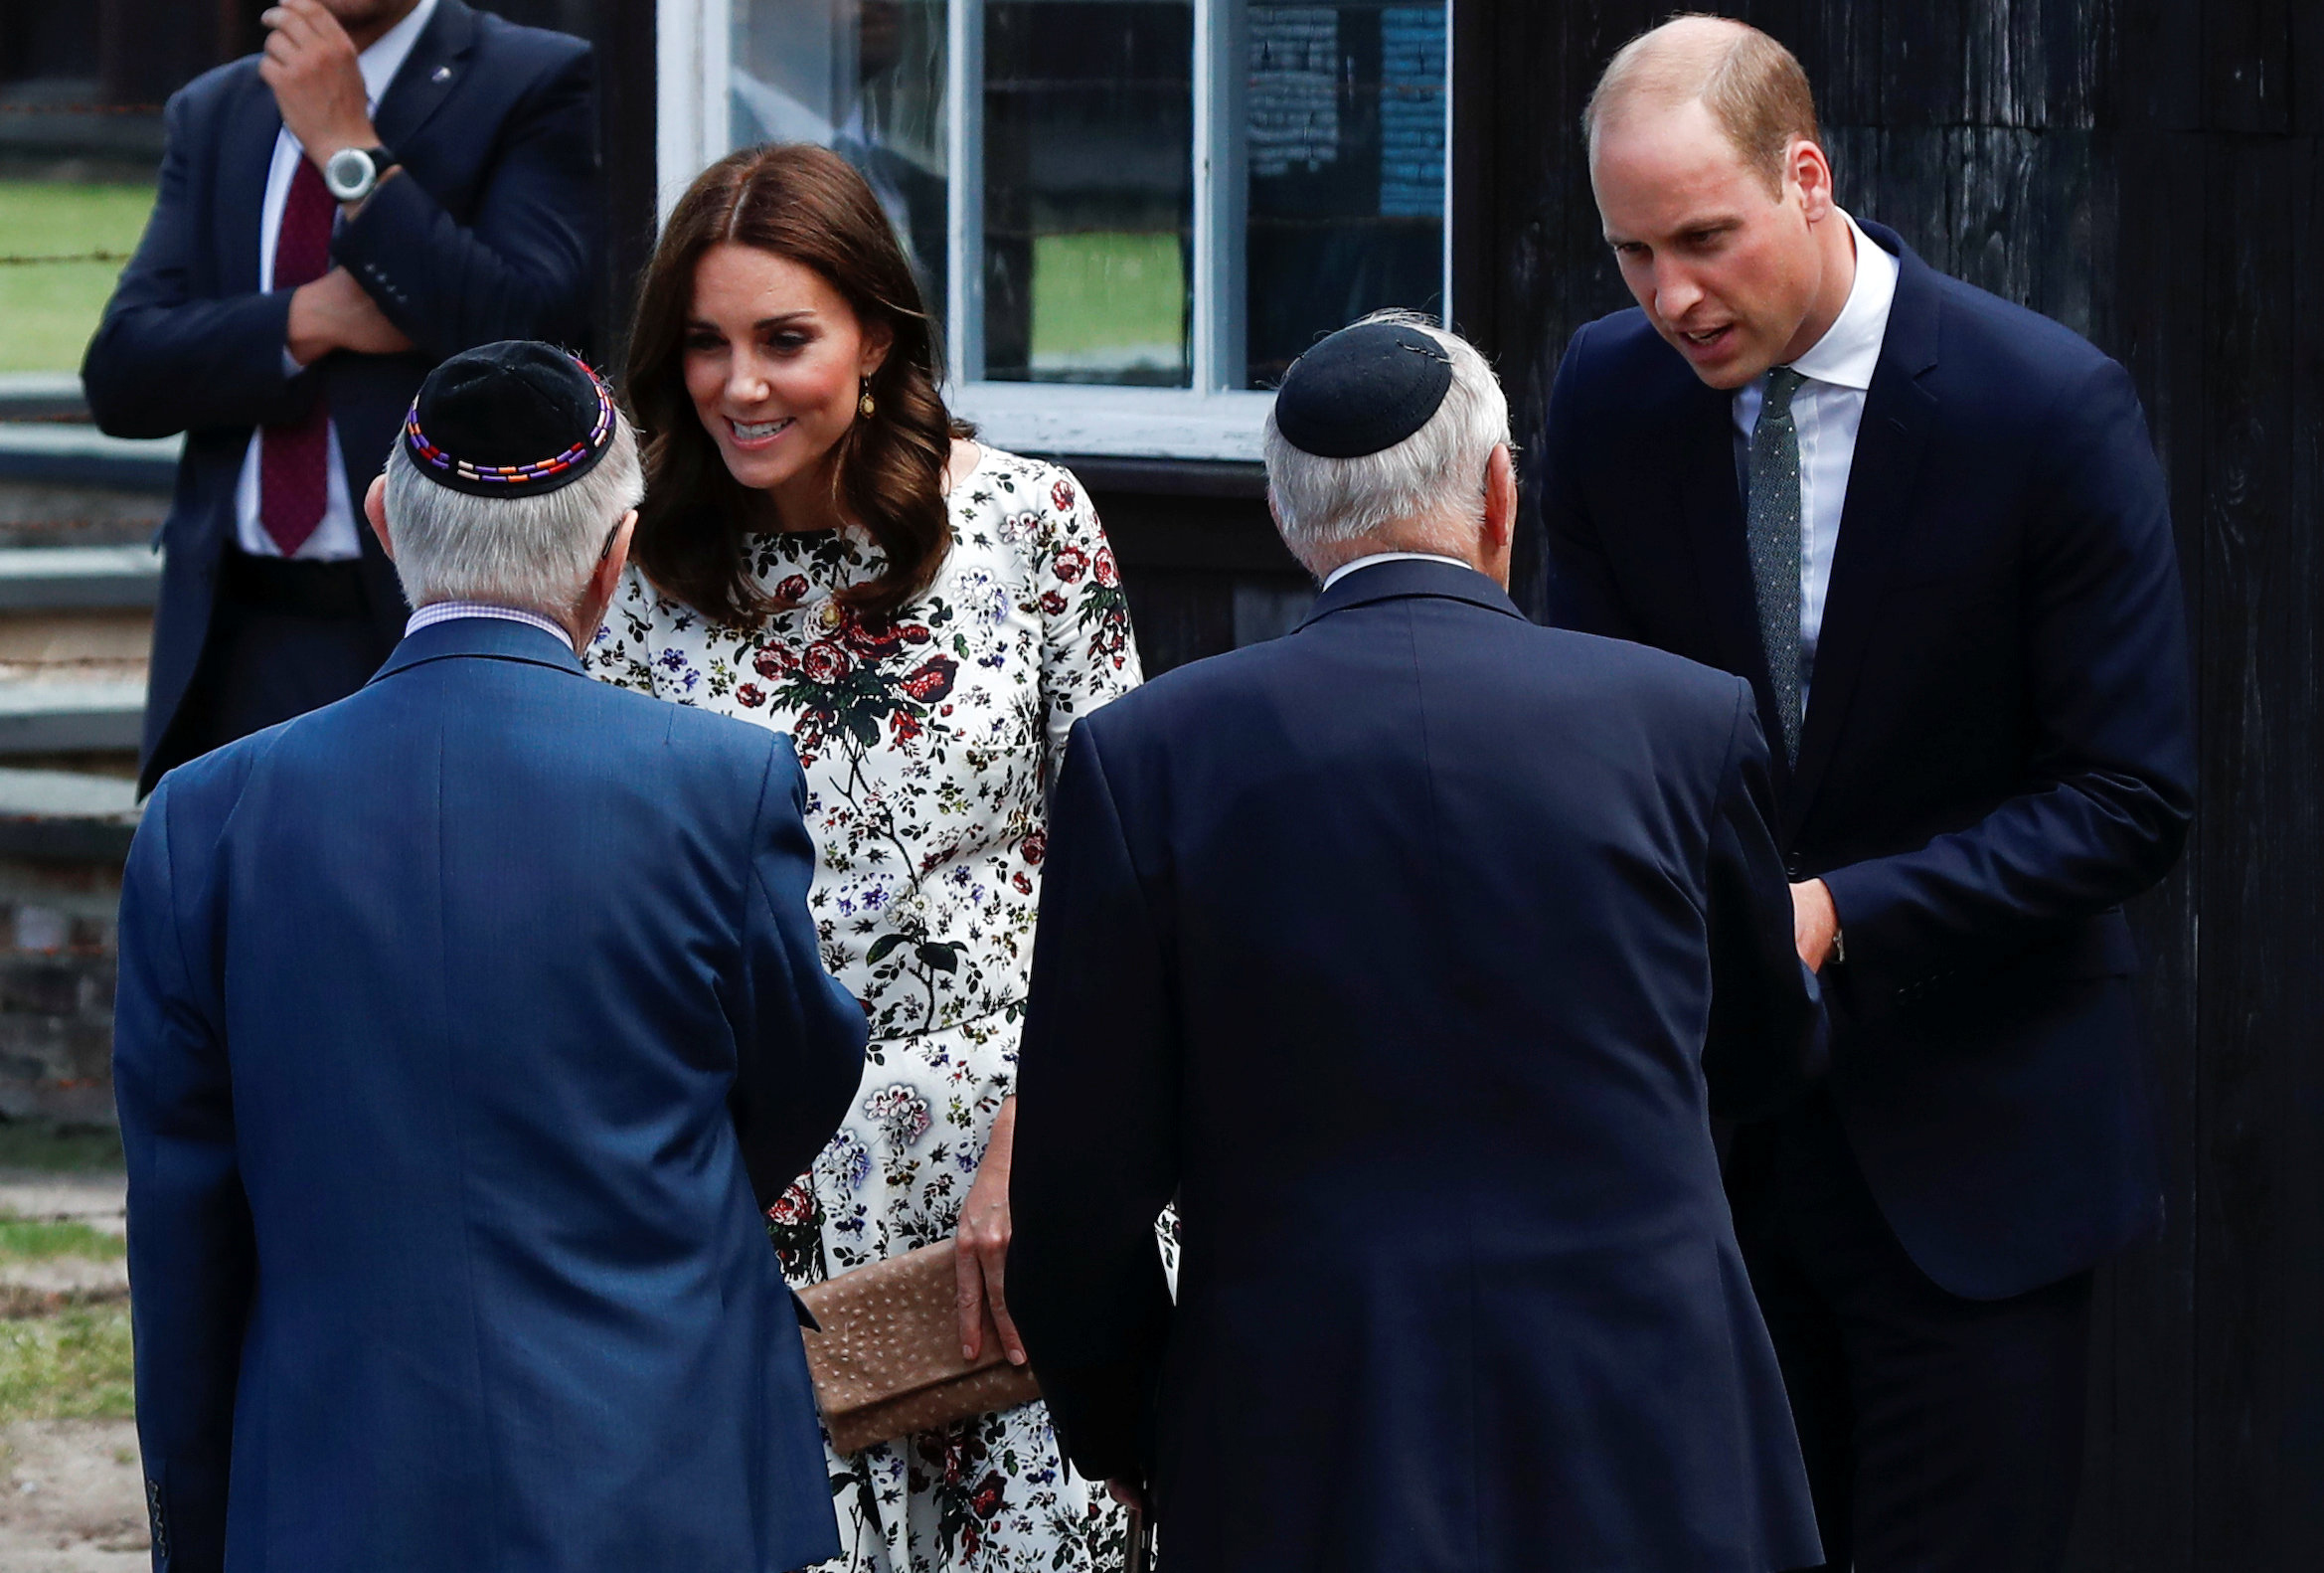 PHOTO: Catherine, The Duchess of Cambridge and Prince William, the Duke of Cambridge meet with Holocaust survivors during their visit at the museum of former German Nazi concentration camp Stutthof in Sztutowo, Poland, July 18, 2017.